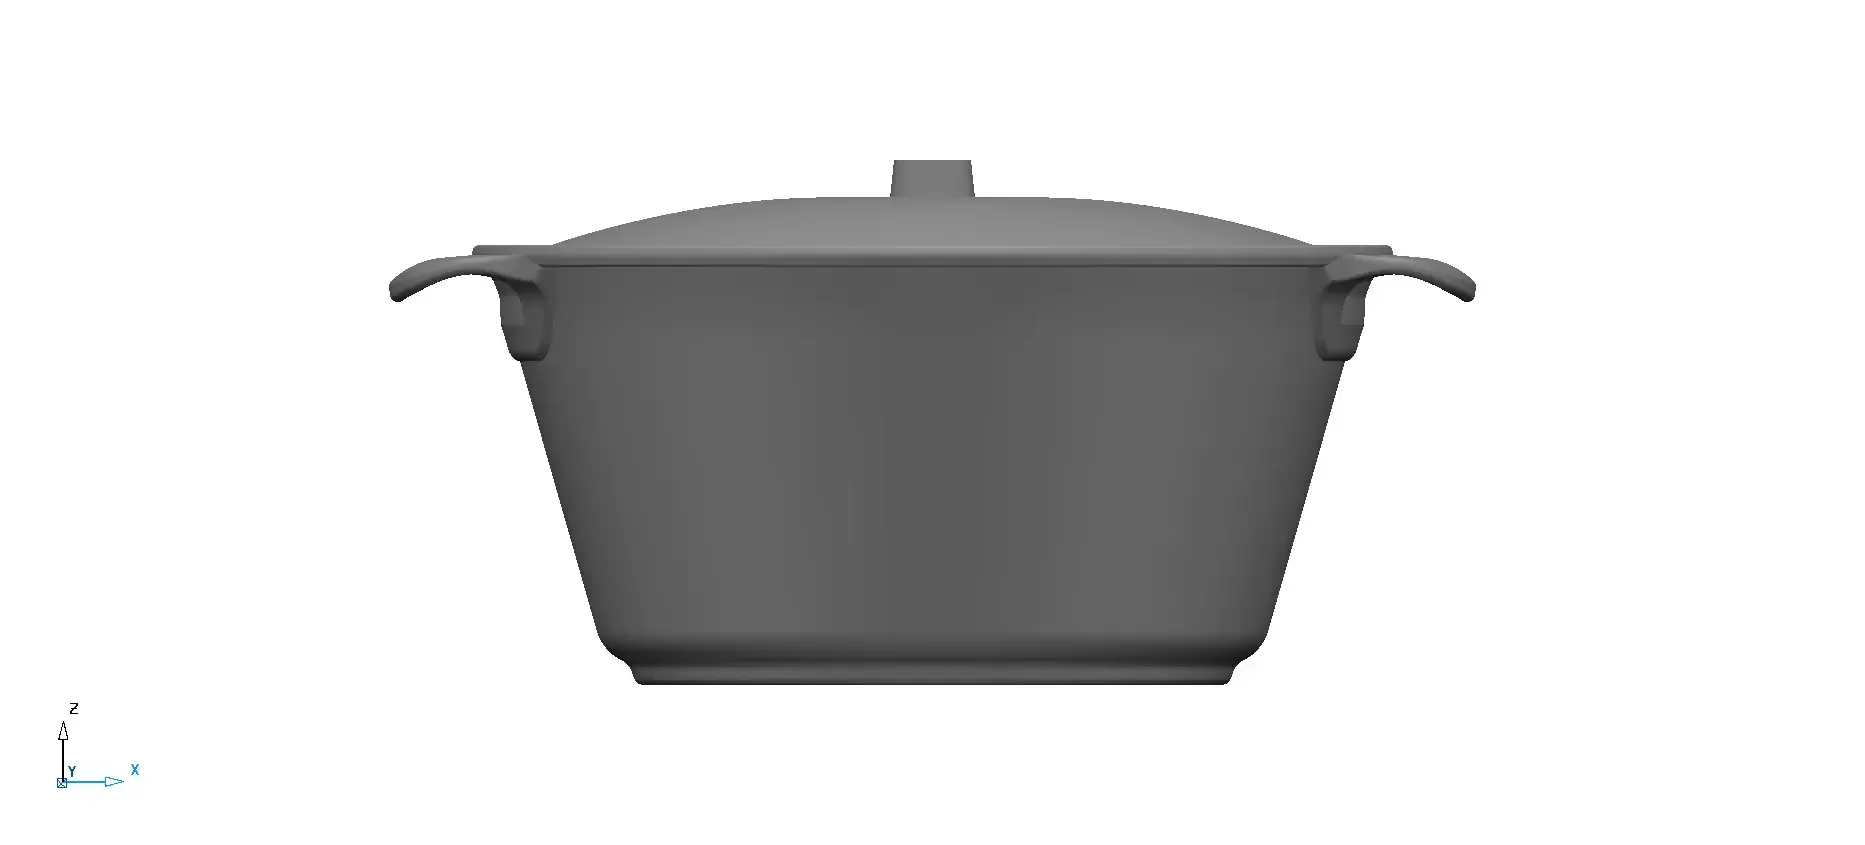 CurryBoul with Lid